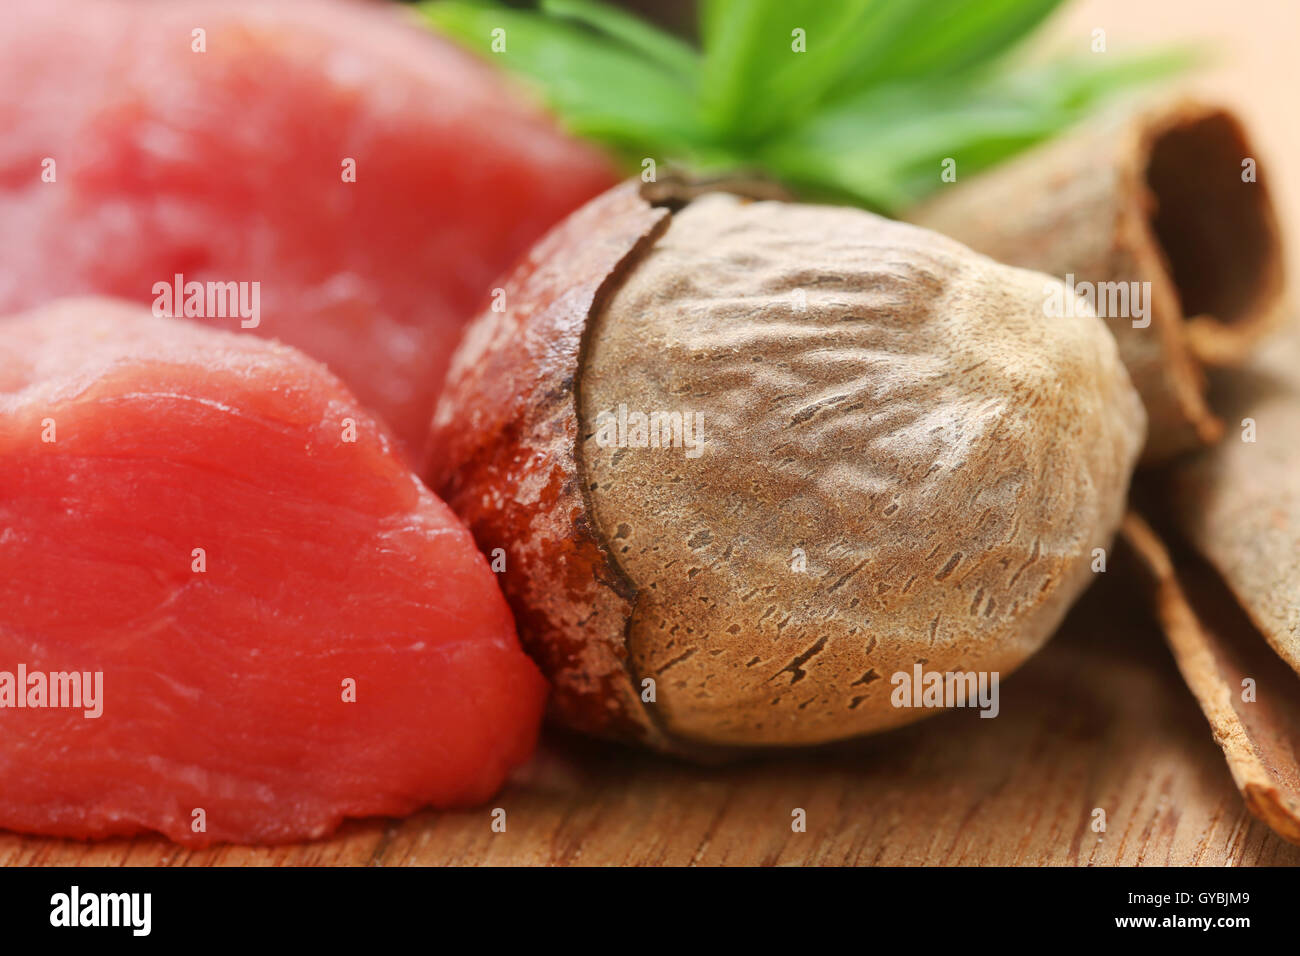 Raw beef with nutmeg other spices on wooden surface Stock Photo